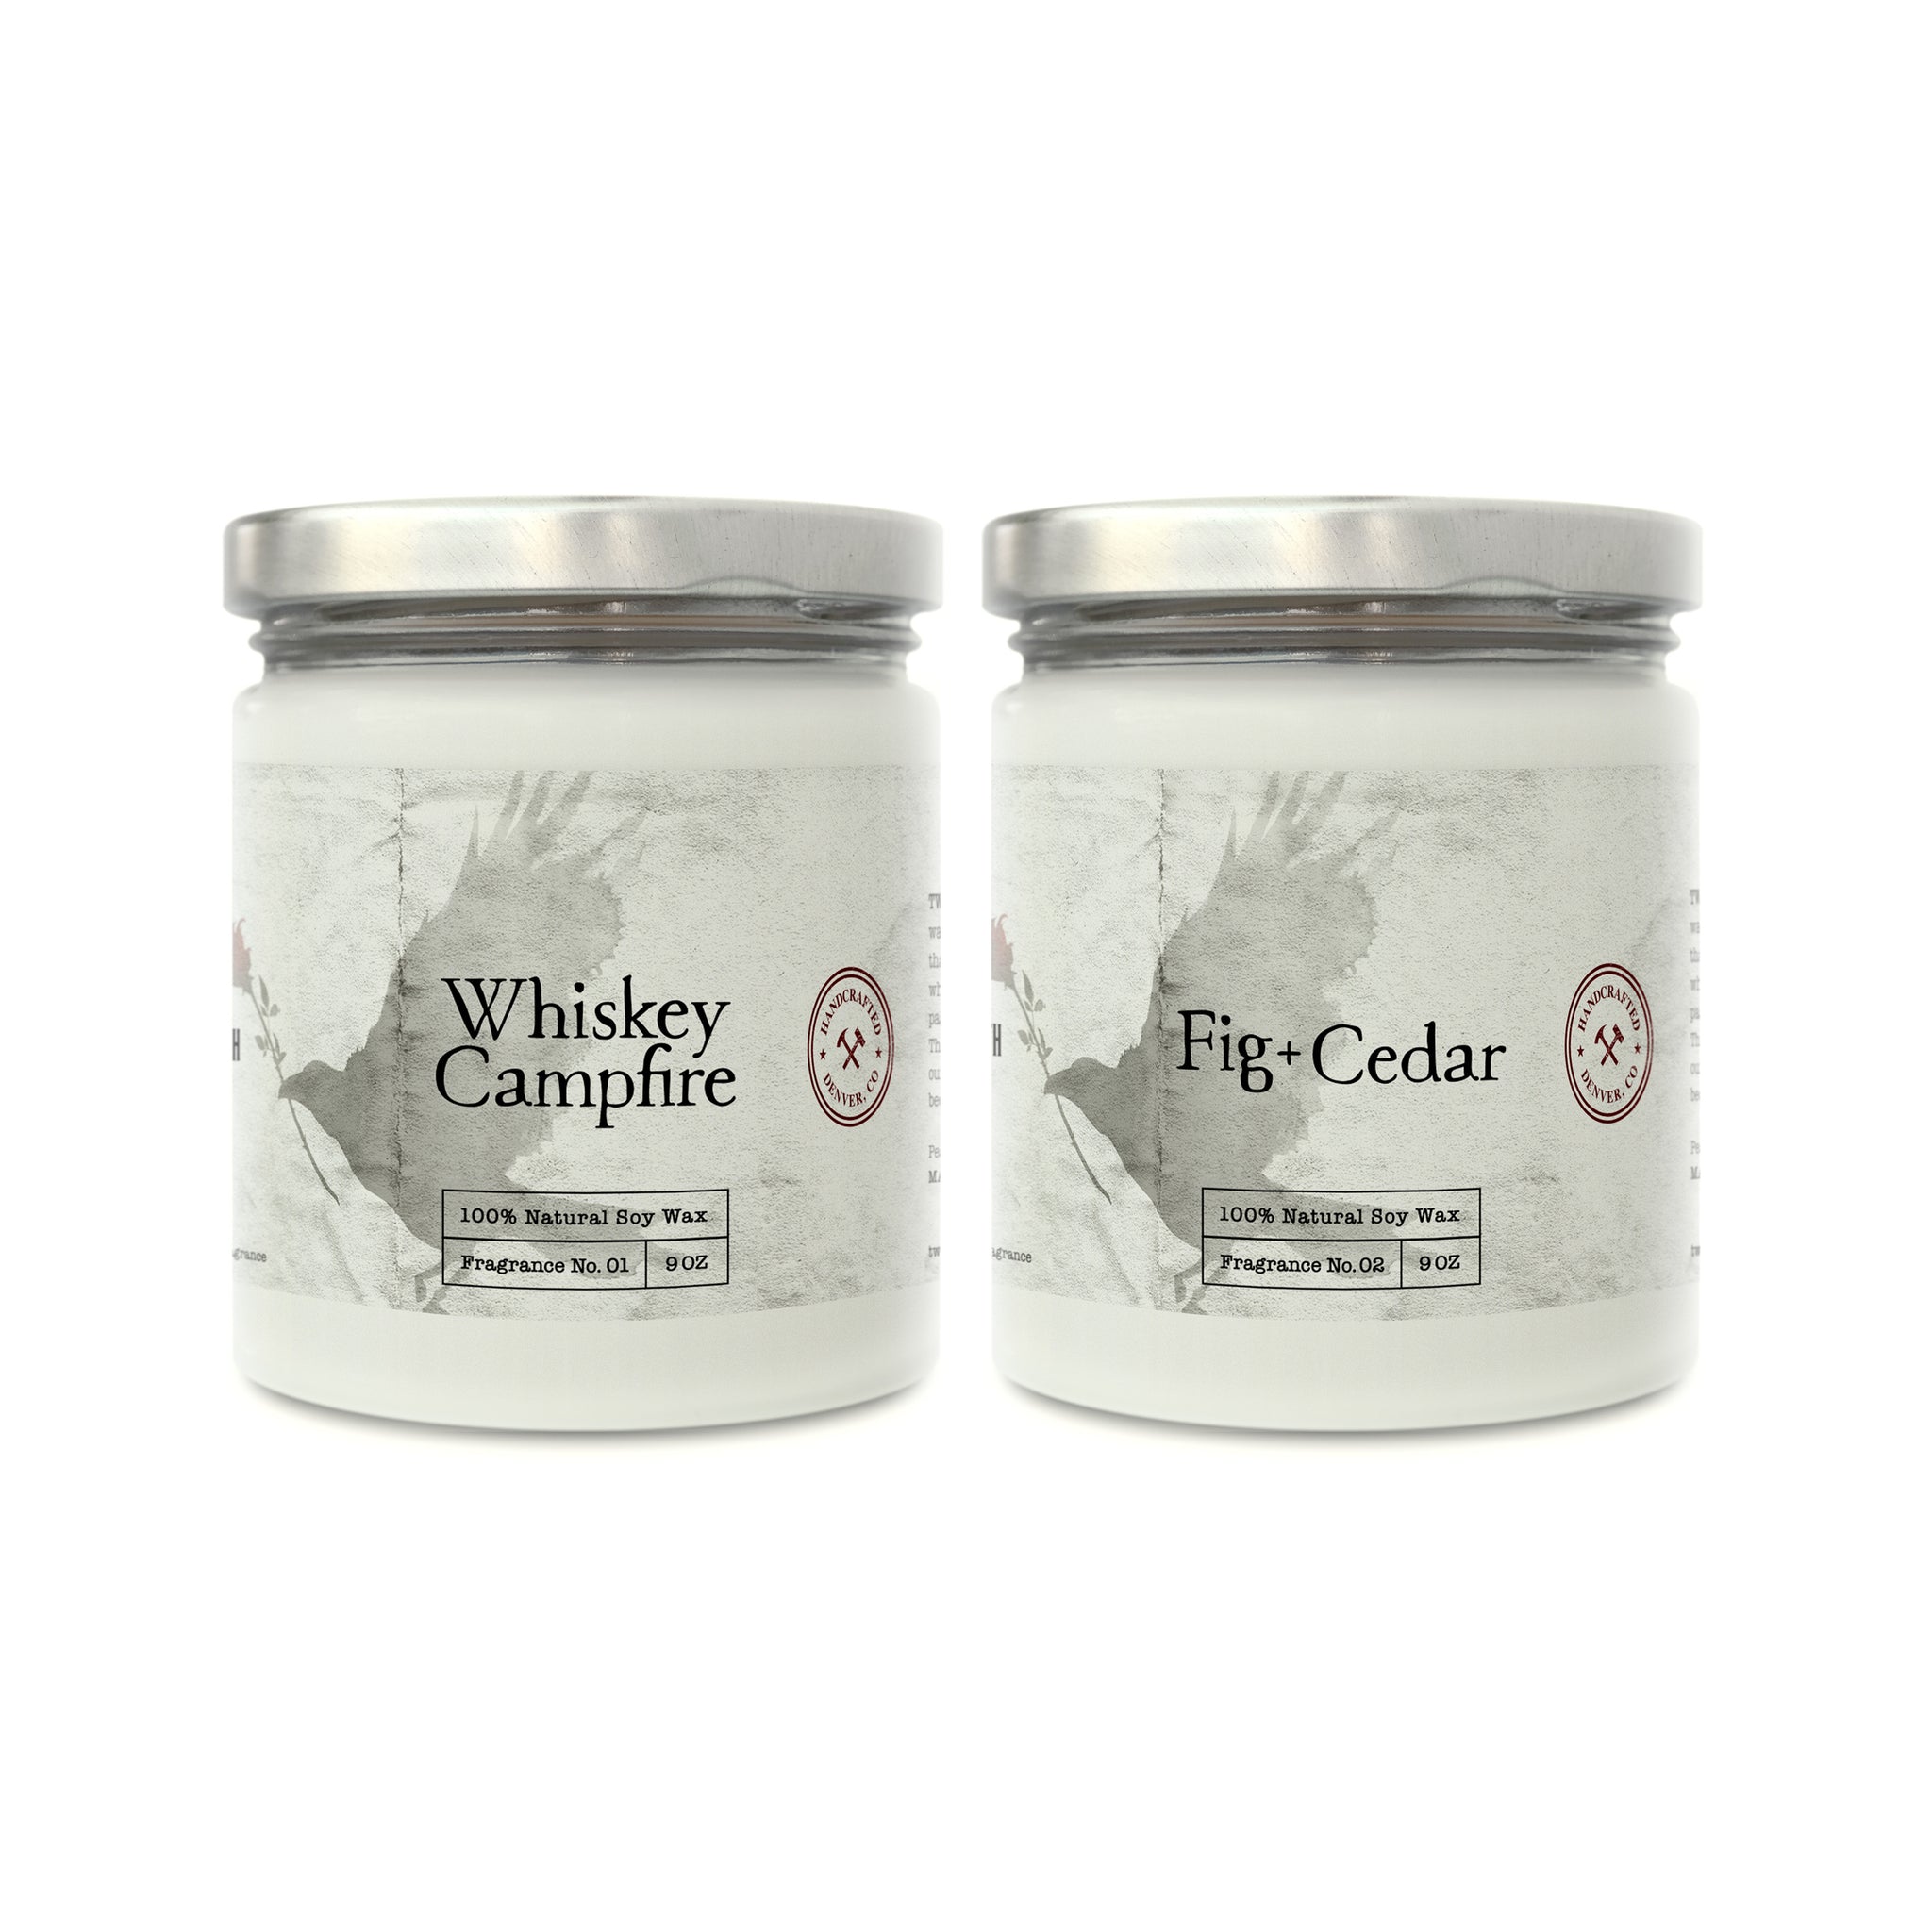 Whiskey Campfire and Fig+Cedar Soy Candles